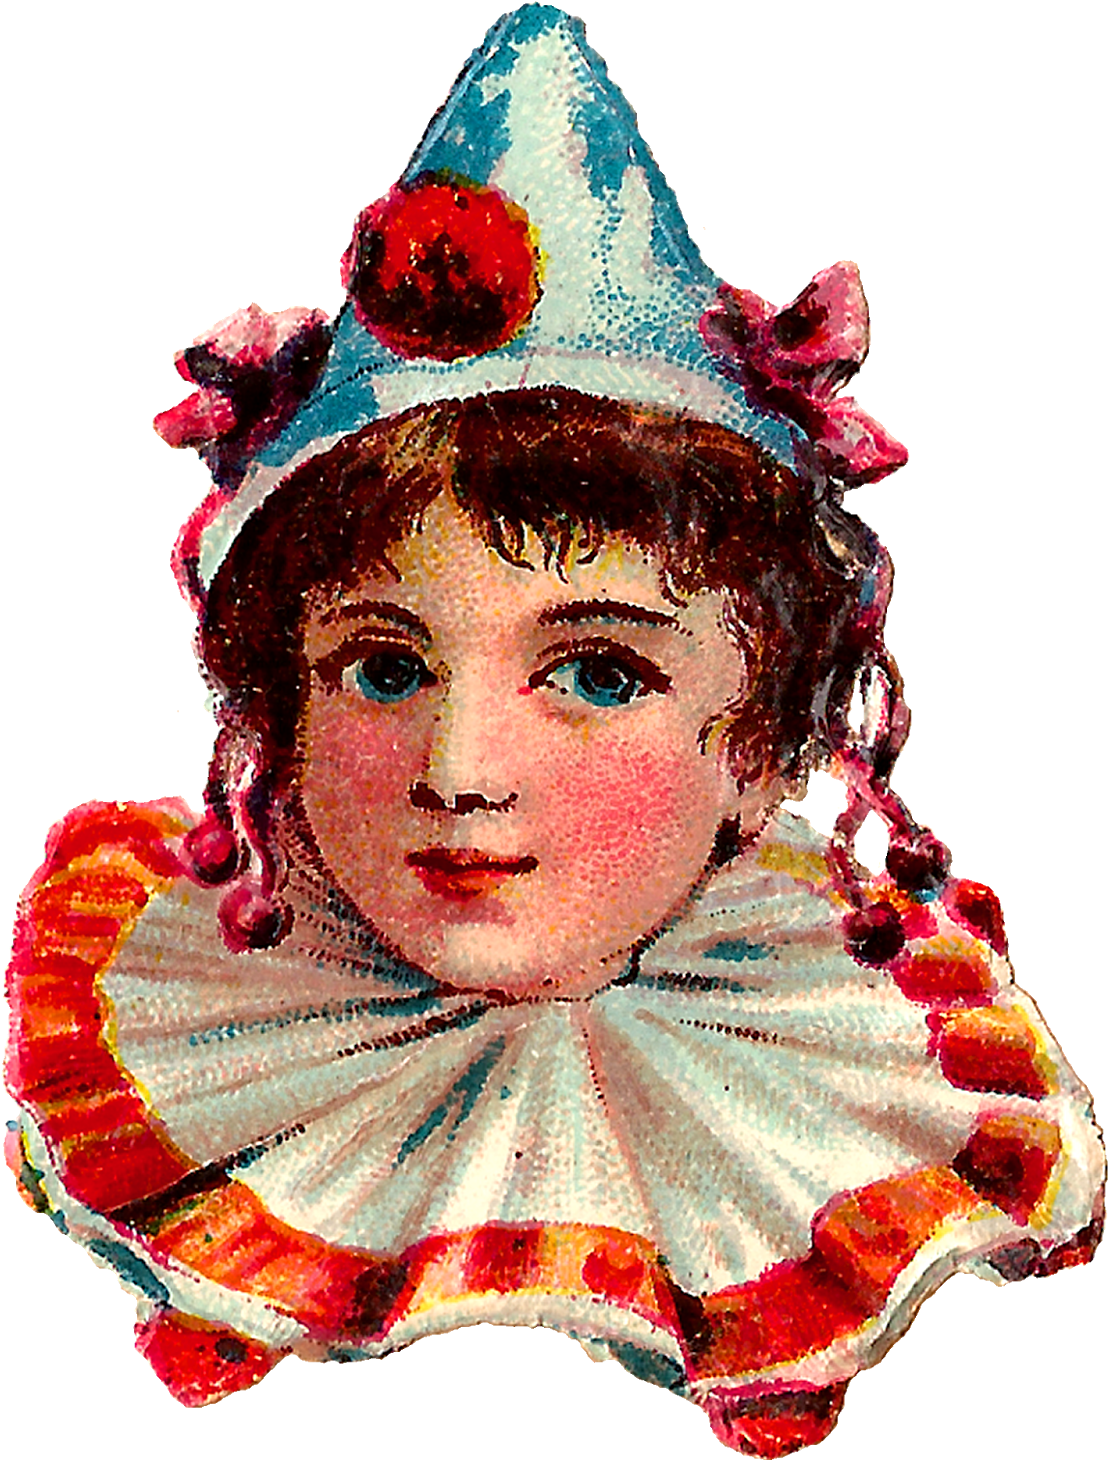 Each Vintage Clown Is Wearing A Pointed Hat With Pompoms - Vintage Circus Clown Clipart (1259x1600)